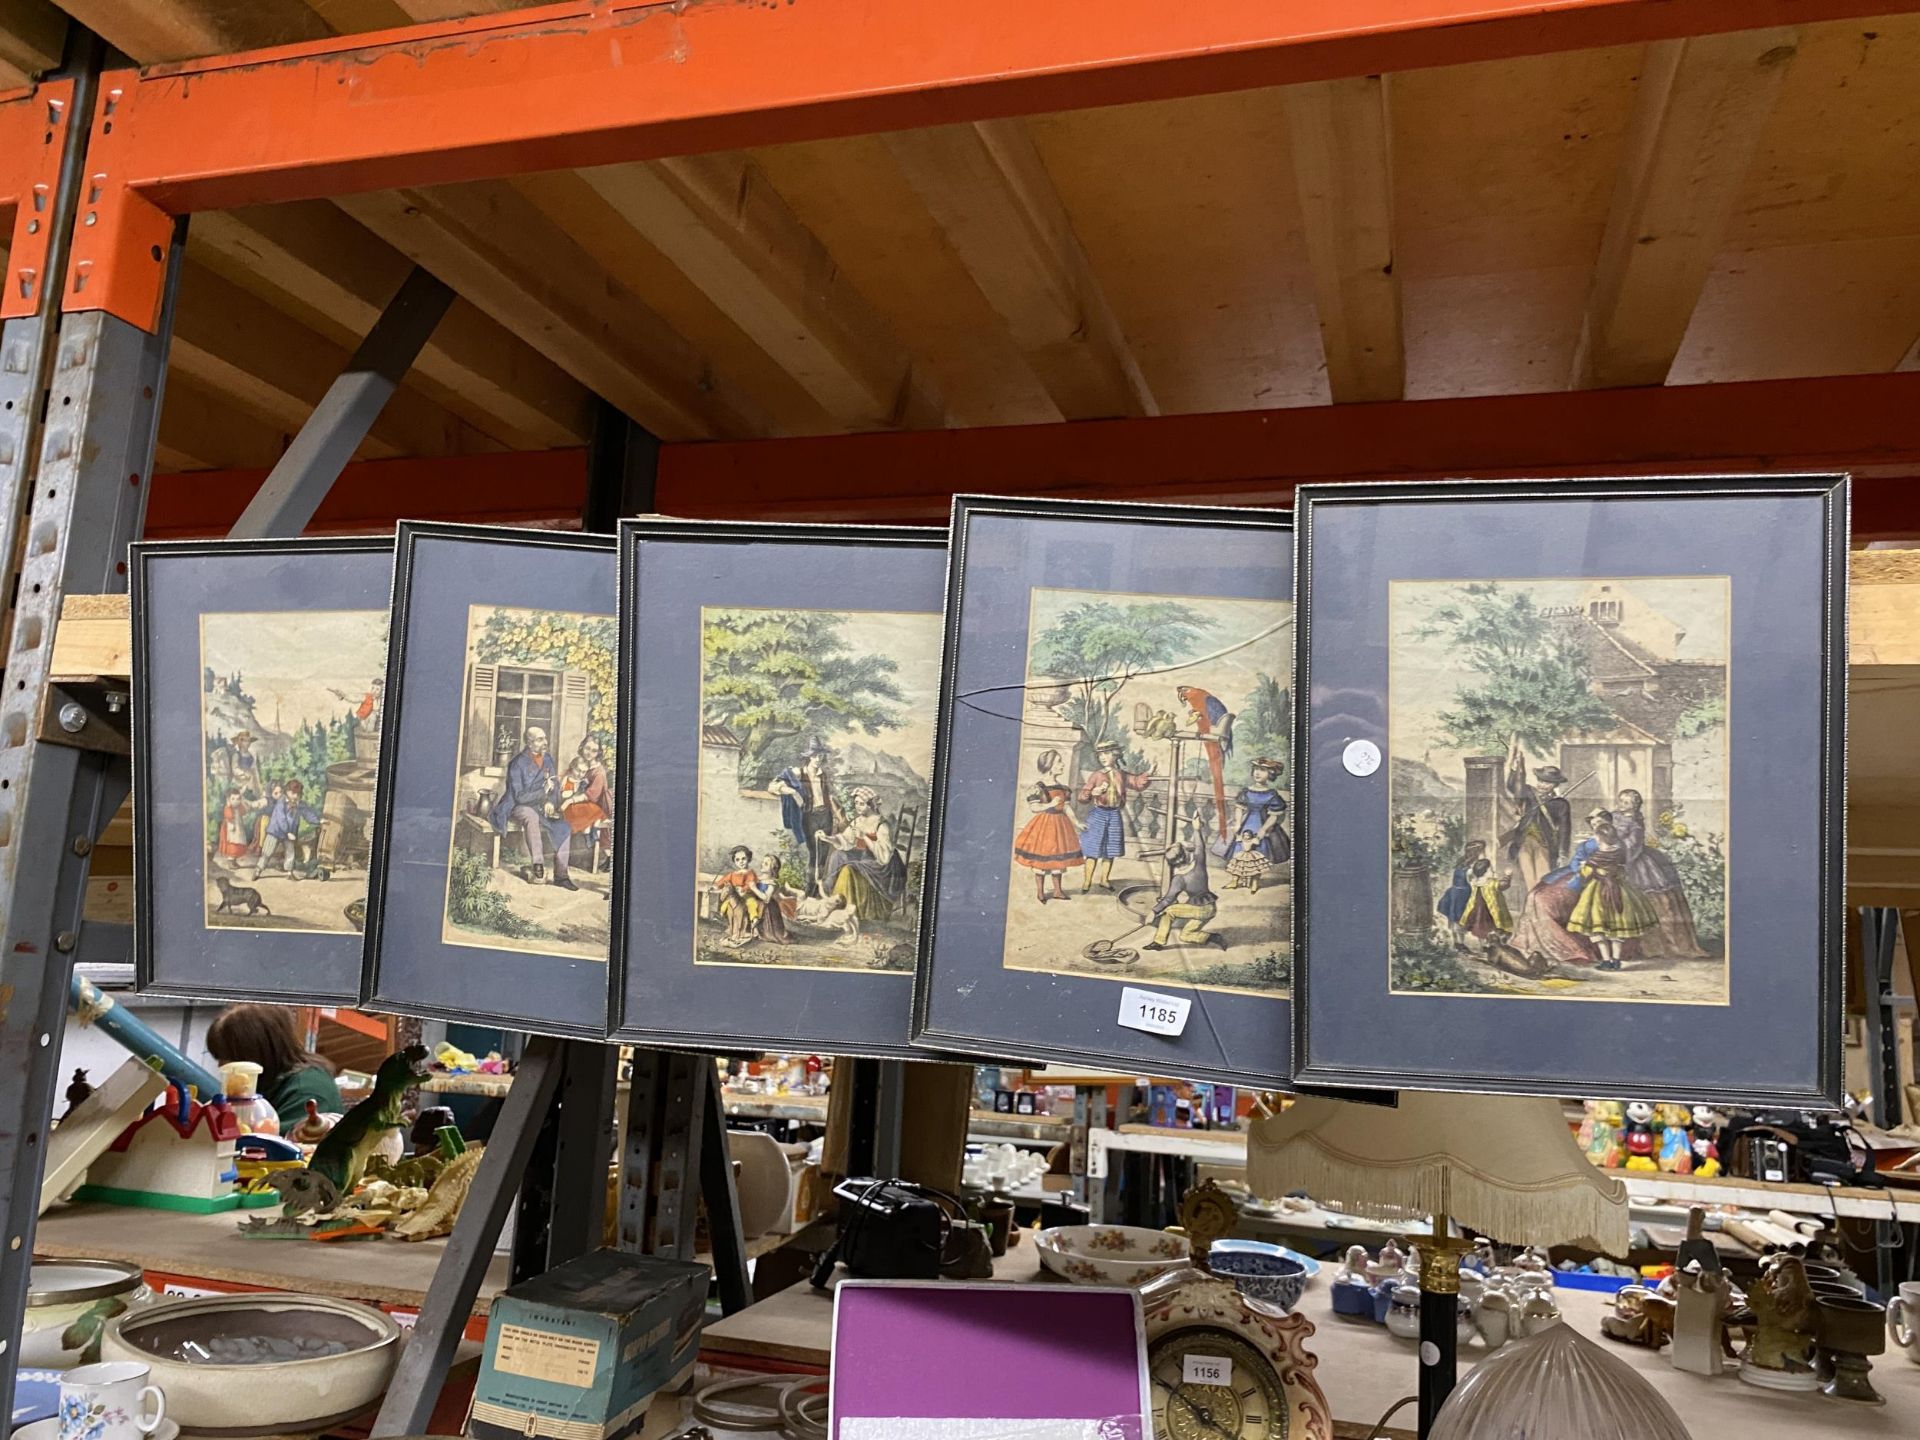 A GROUP OF FIVE FRAMED ENGRAVINGS